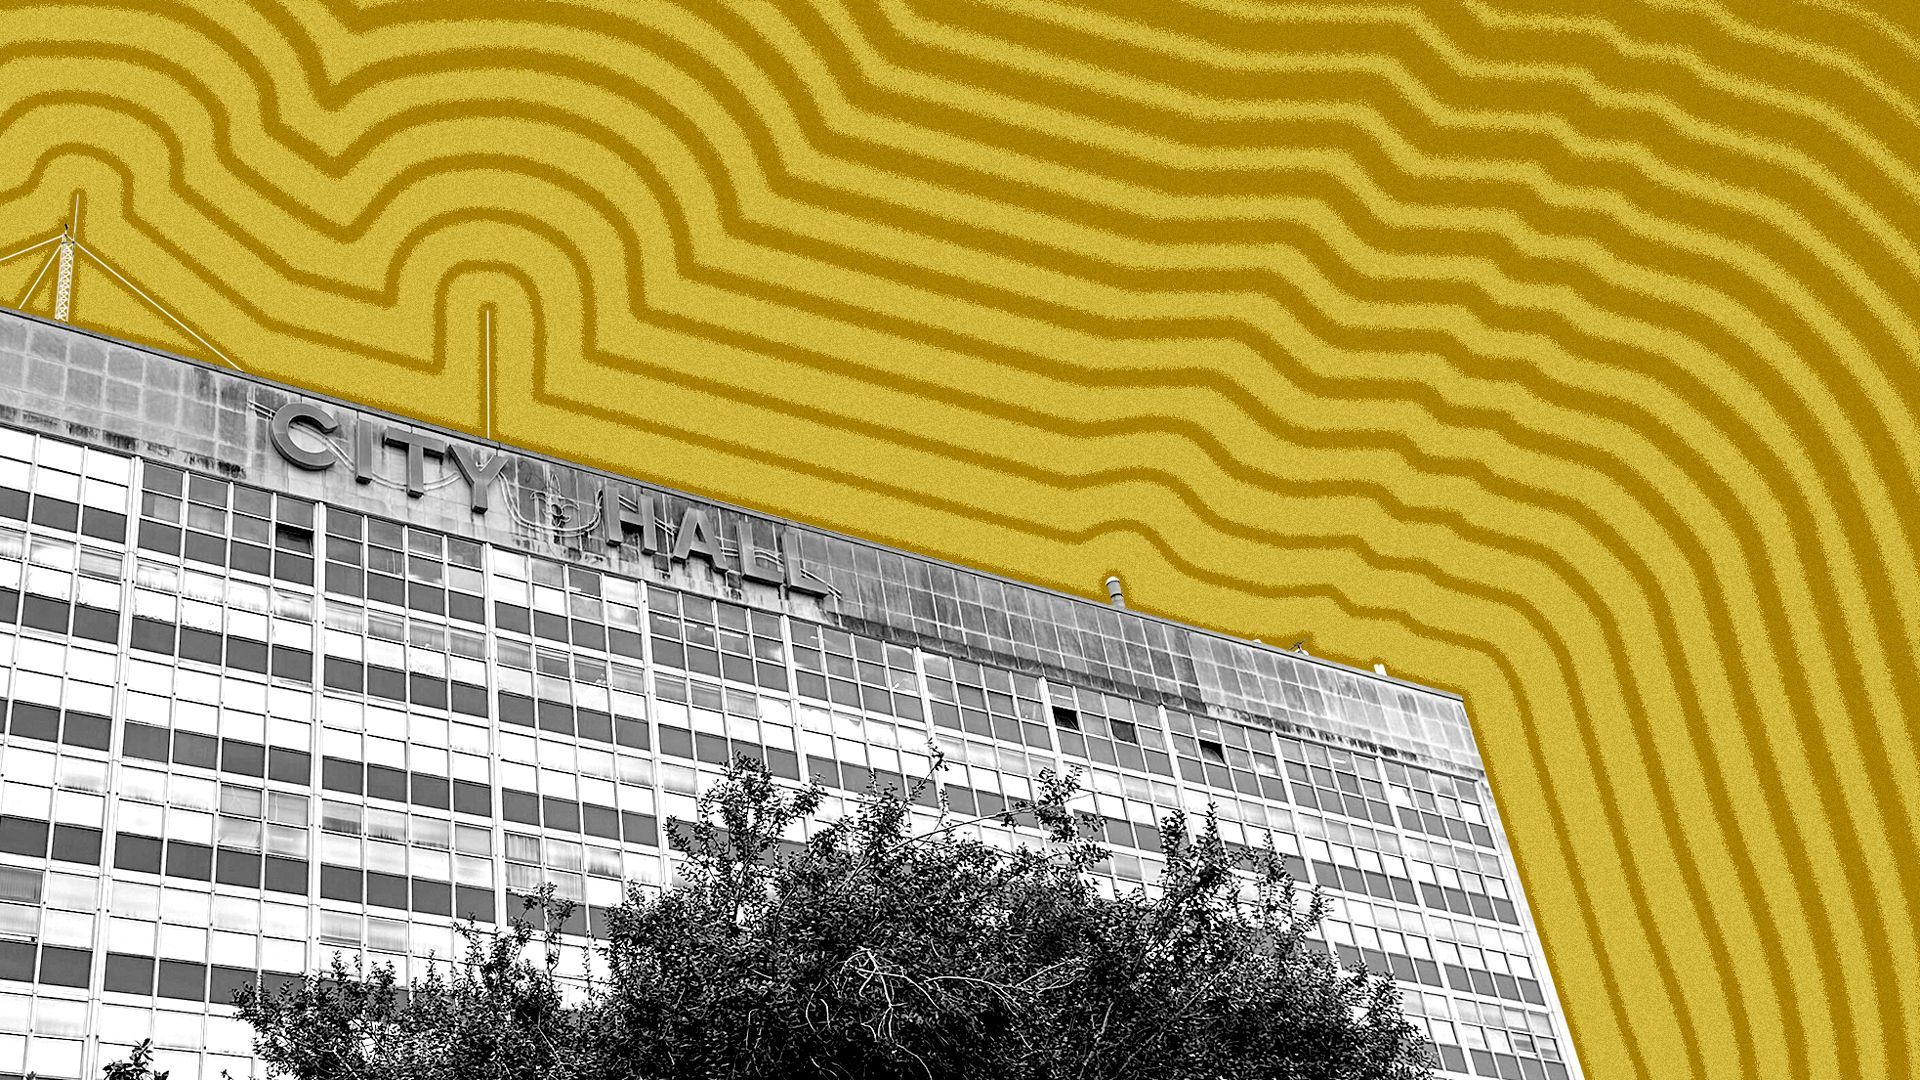 Photo illustration of New Orleans City Hall with lines radiating from it.